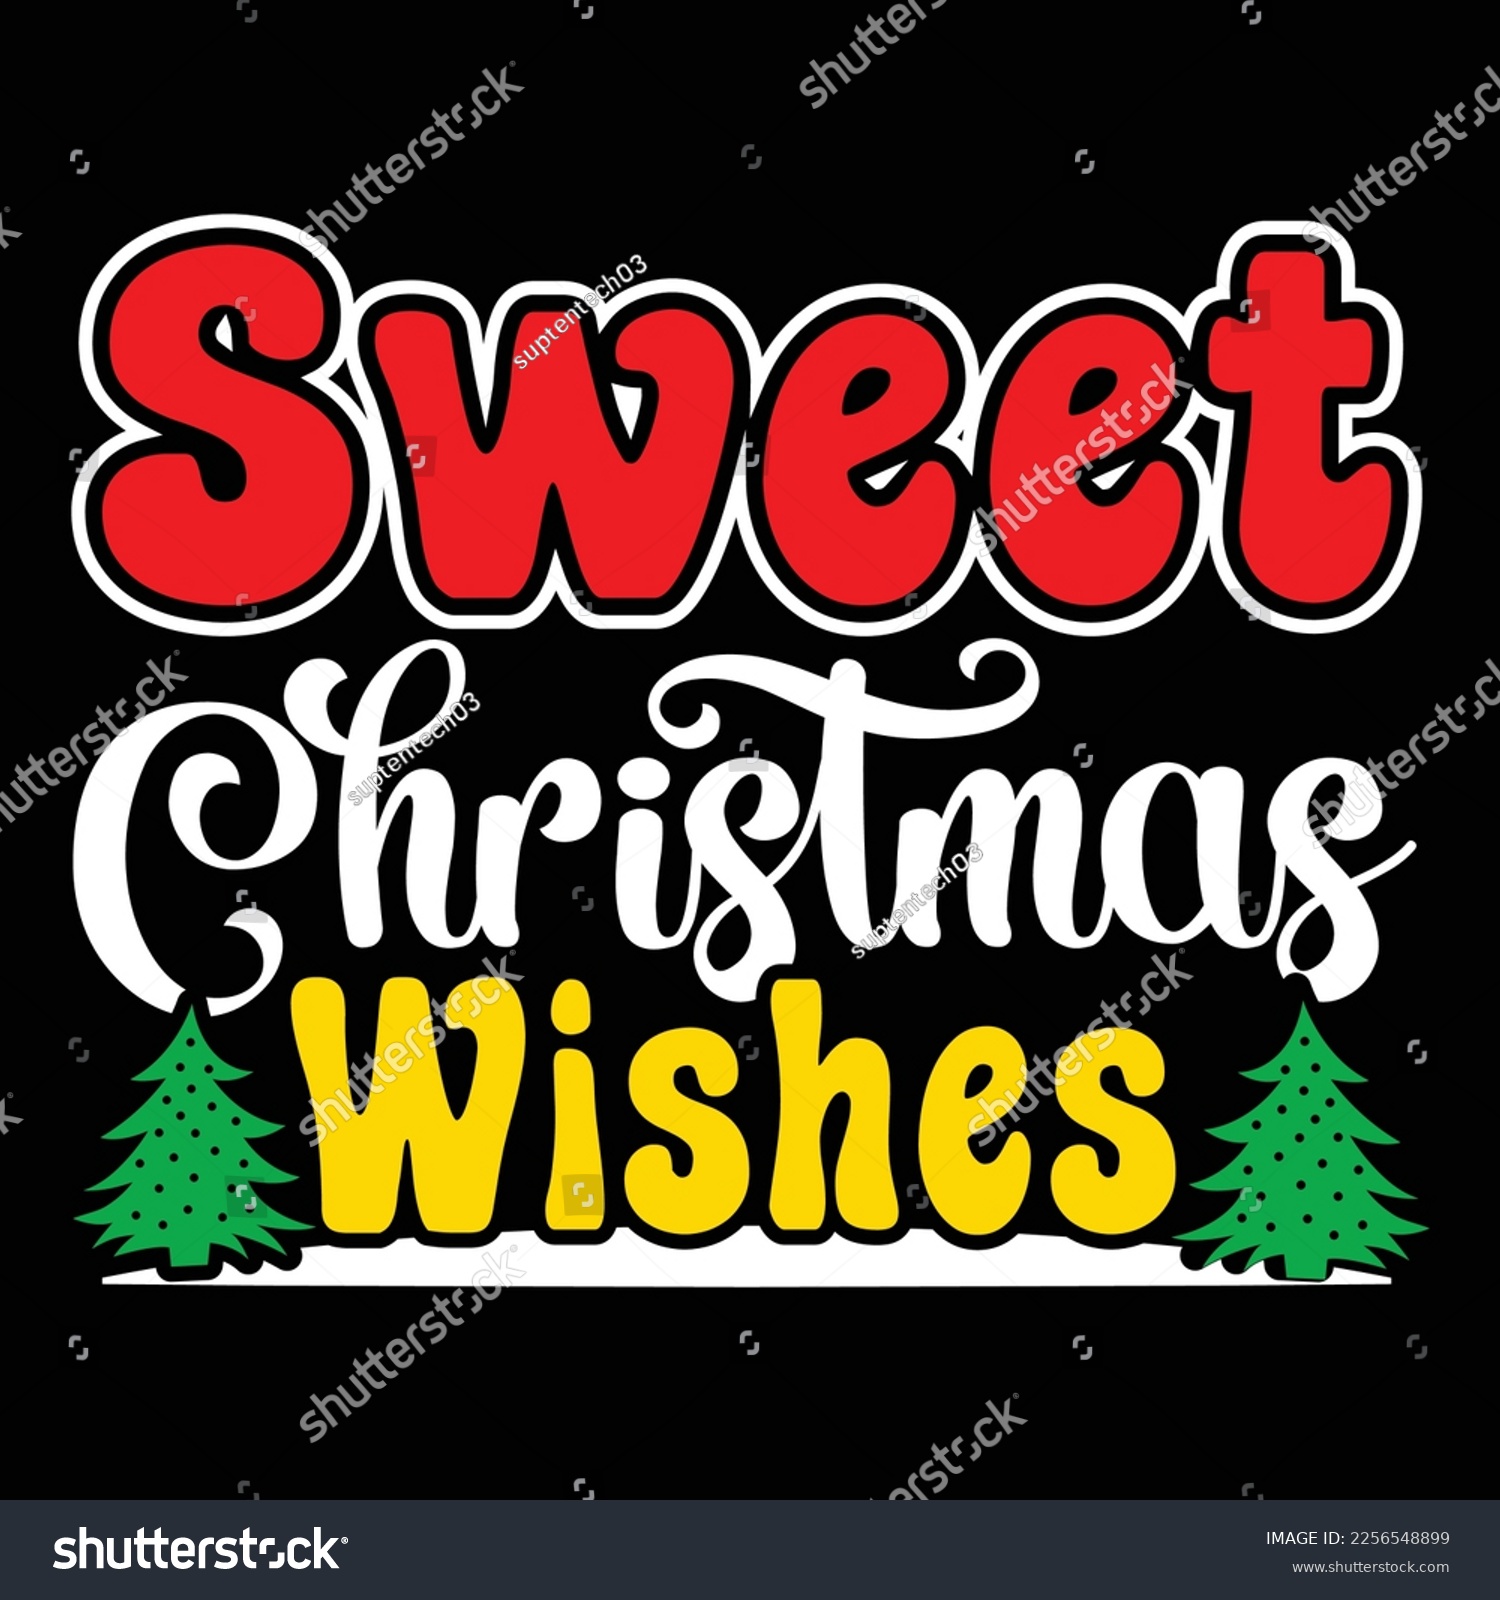 SVG of Sweet Christmas Wishes, Merry Christmas shirts Print Template, Xmas Ugly Snow Santa Clouse New Year Holiday Candy Santa Hat vector illustration for Christmas hand lettered svg